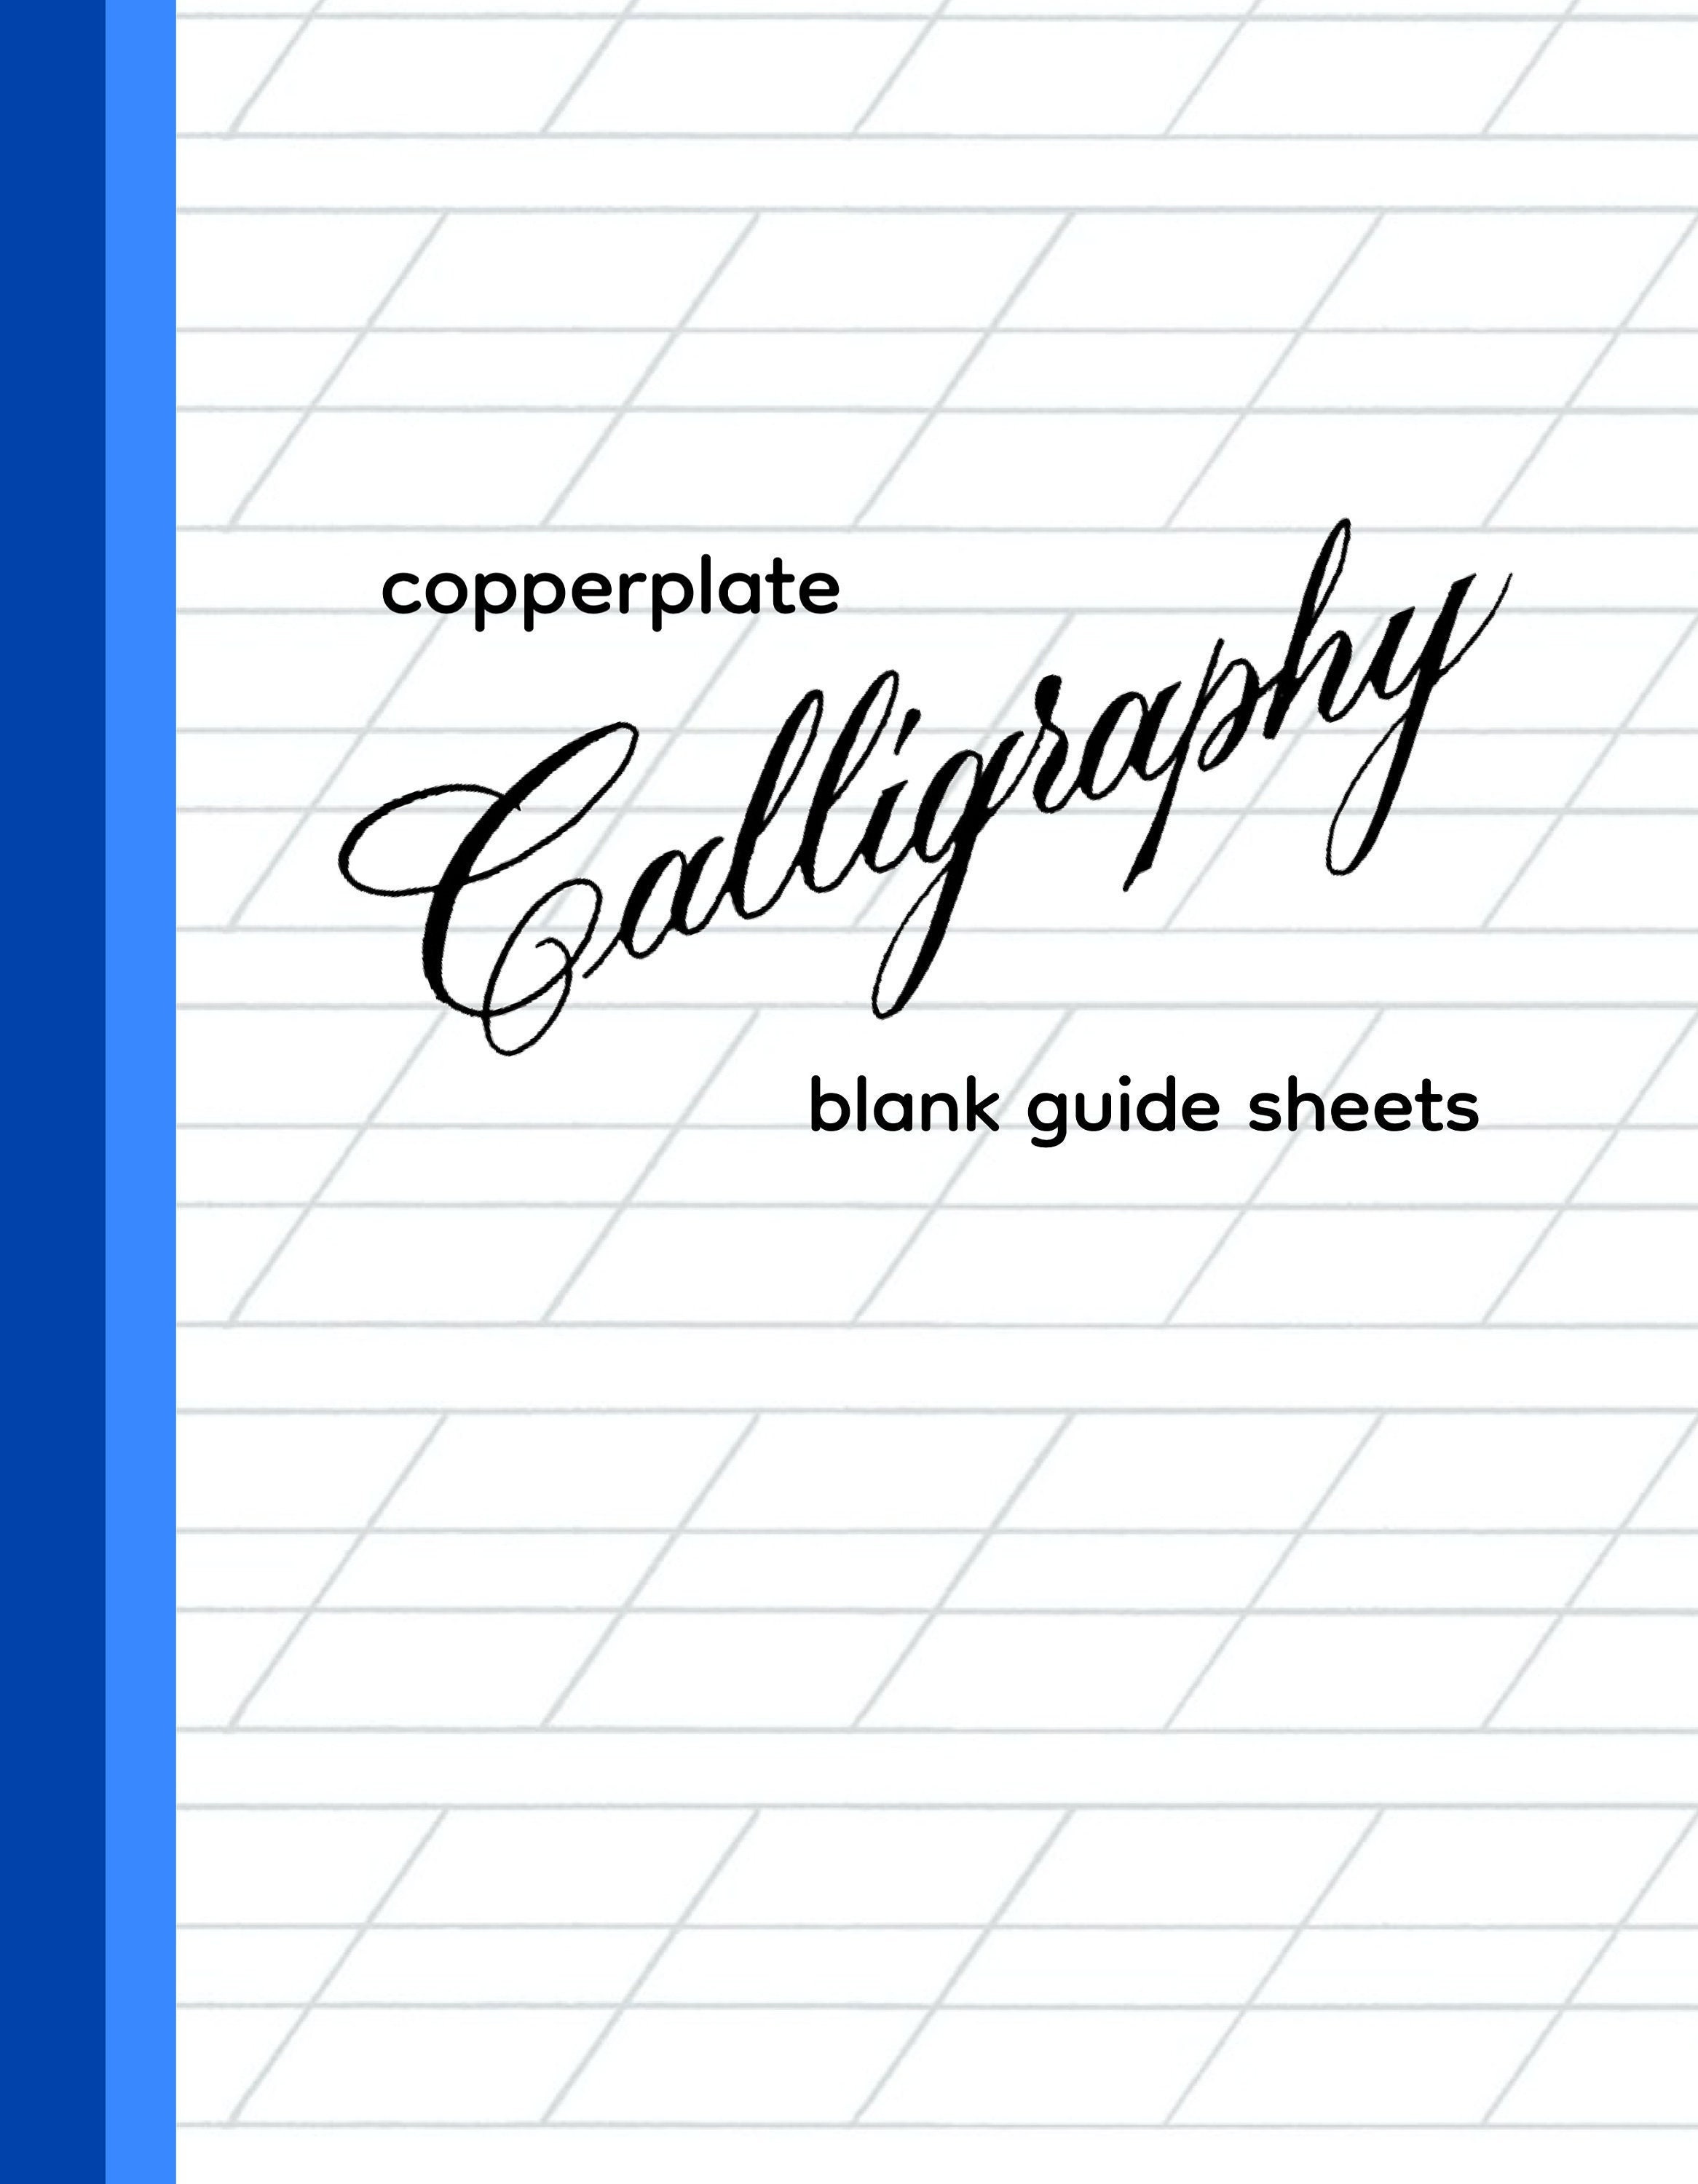 55 Degree Guide Sheets. Calligraphy Paper Stock Vector